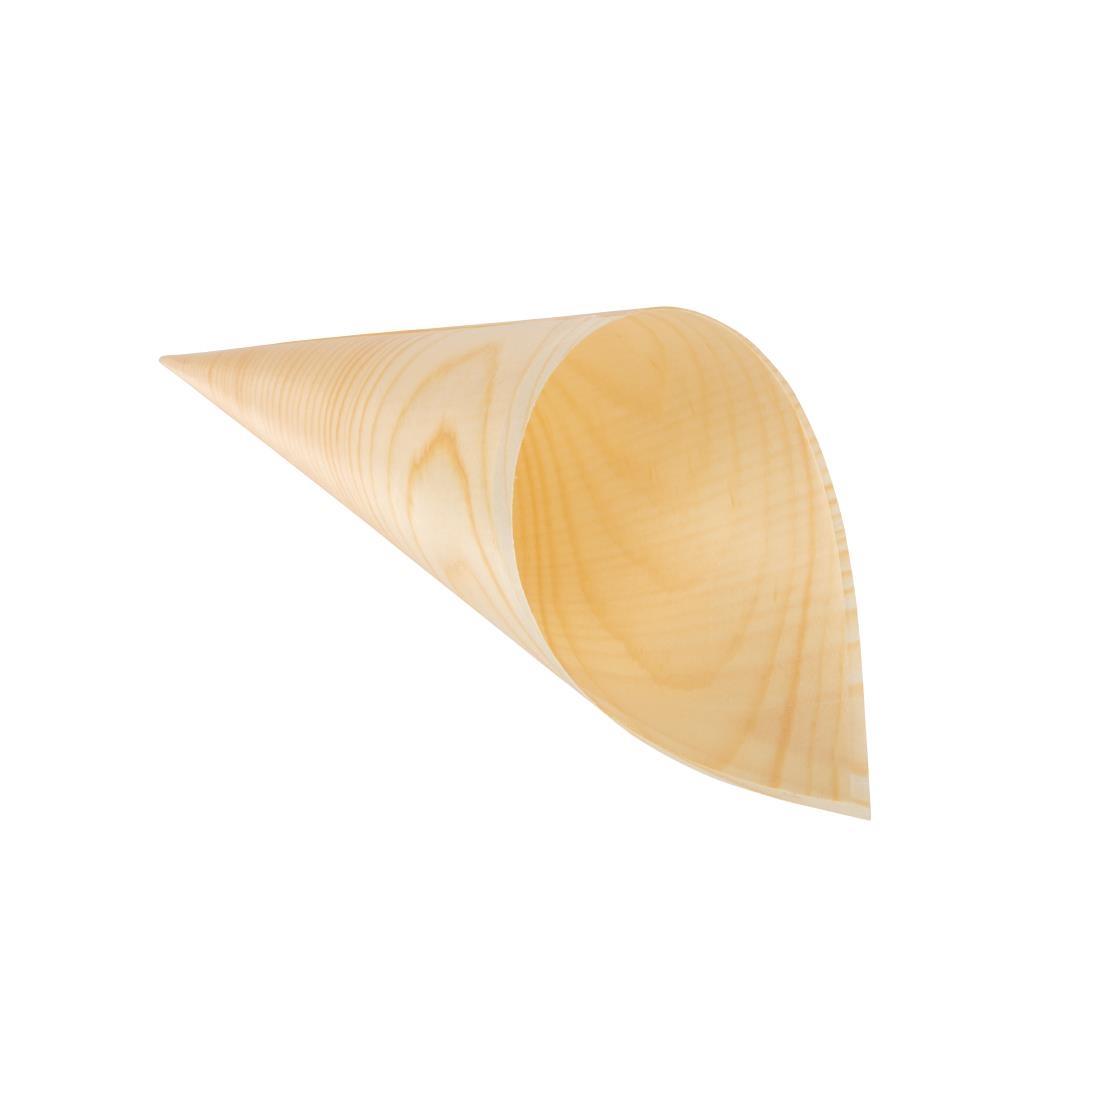 Fiesta Compostable Wooden Canape Cones 75mm (Pack of 100) - DK389  - 4